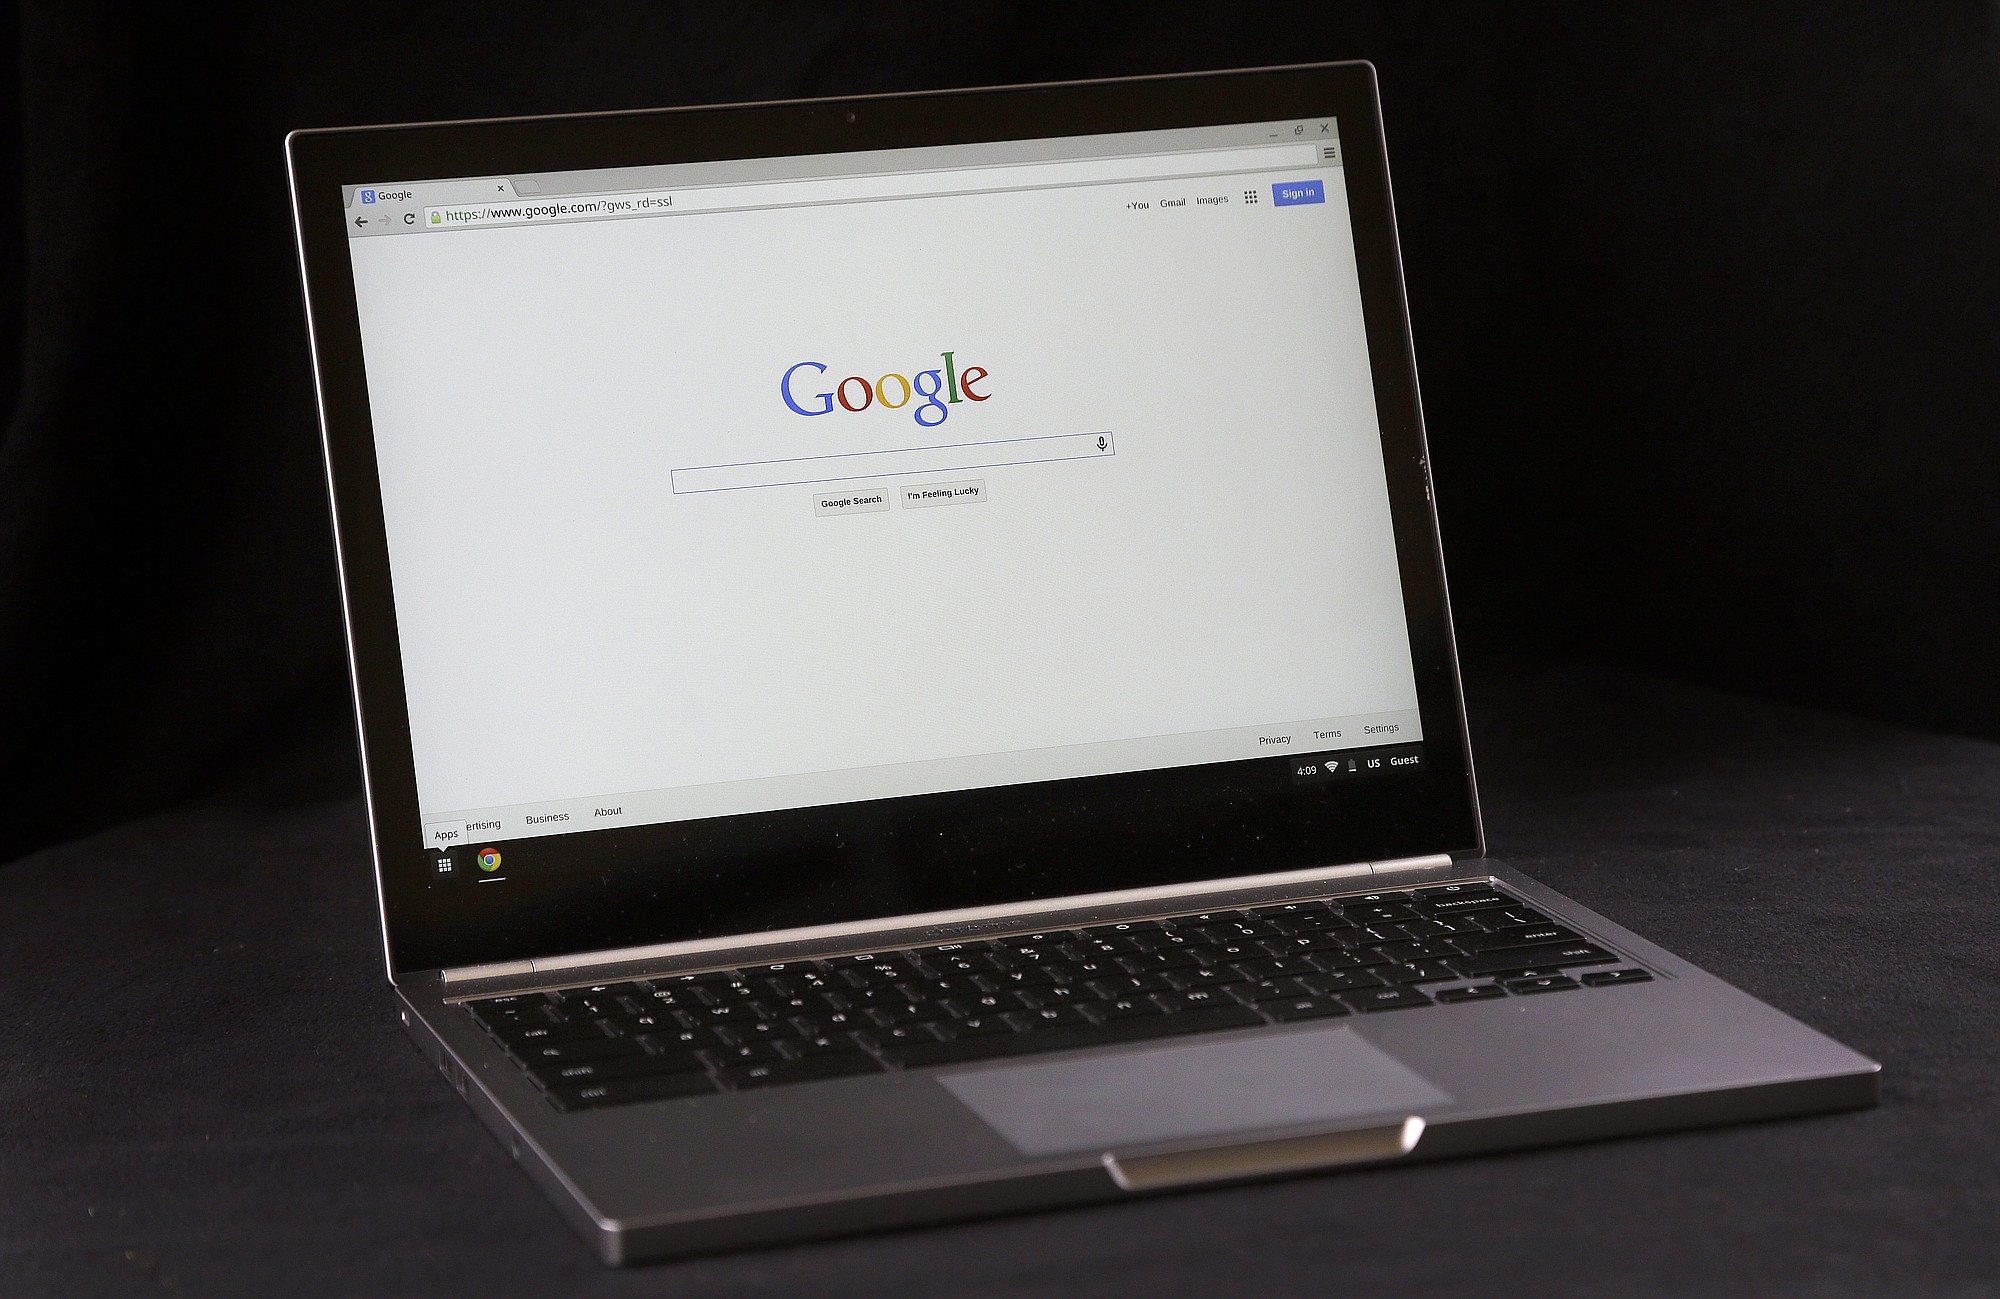 The Google home page on a Chromebook Pixel laptop.